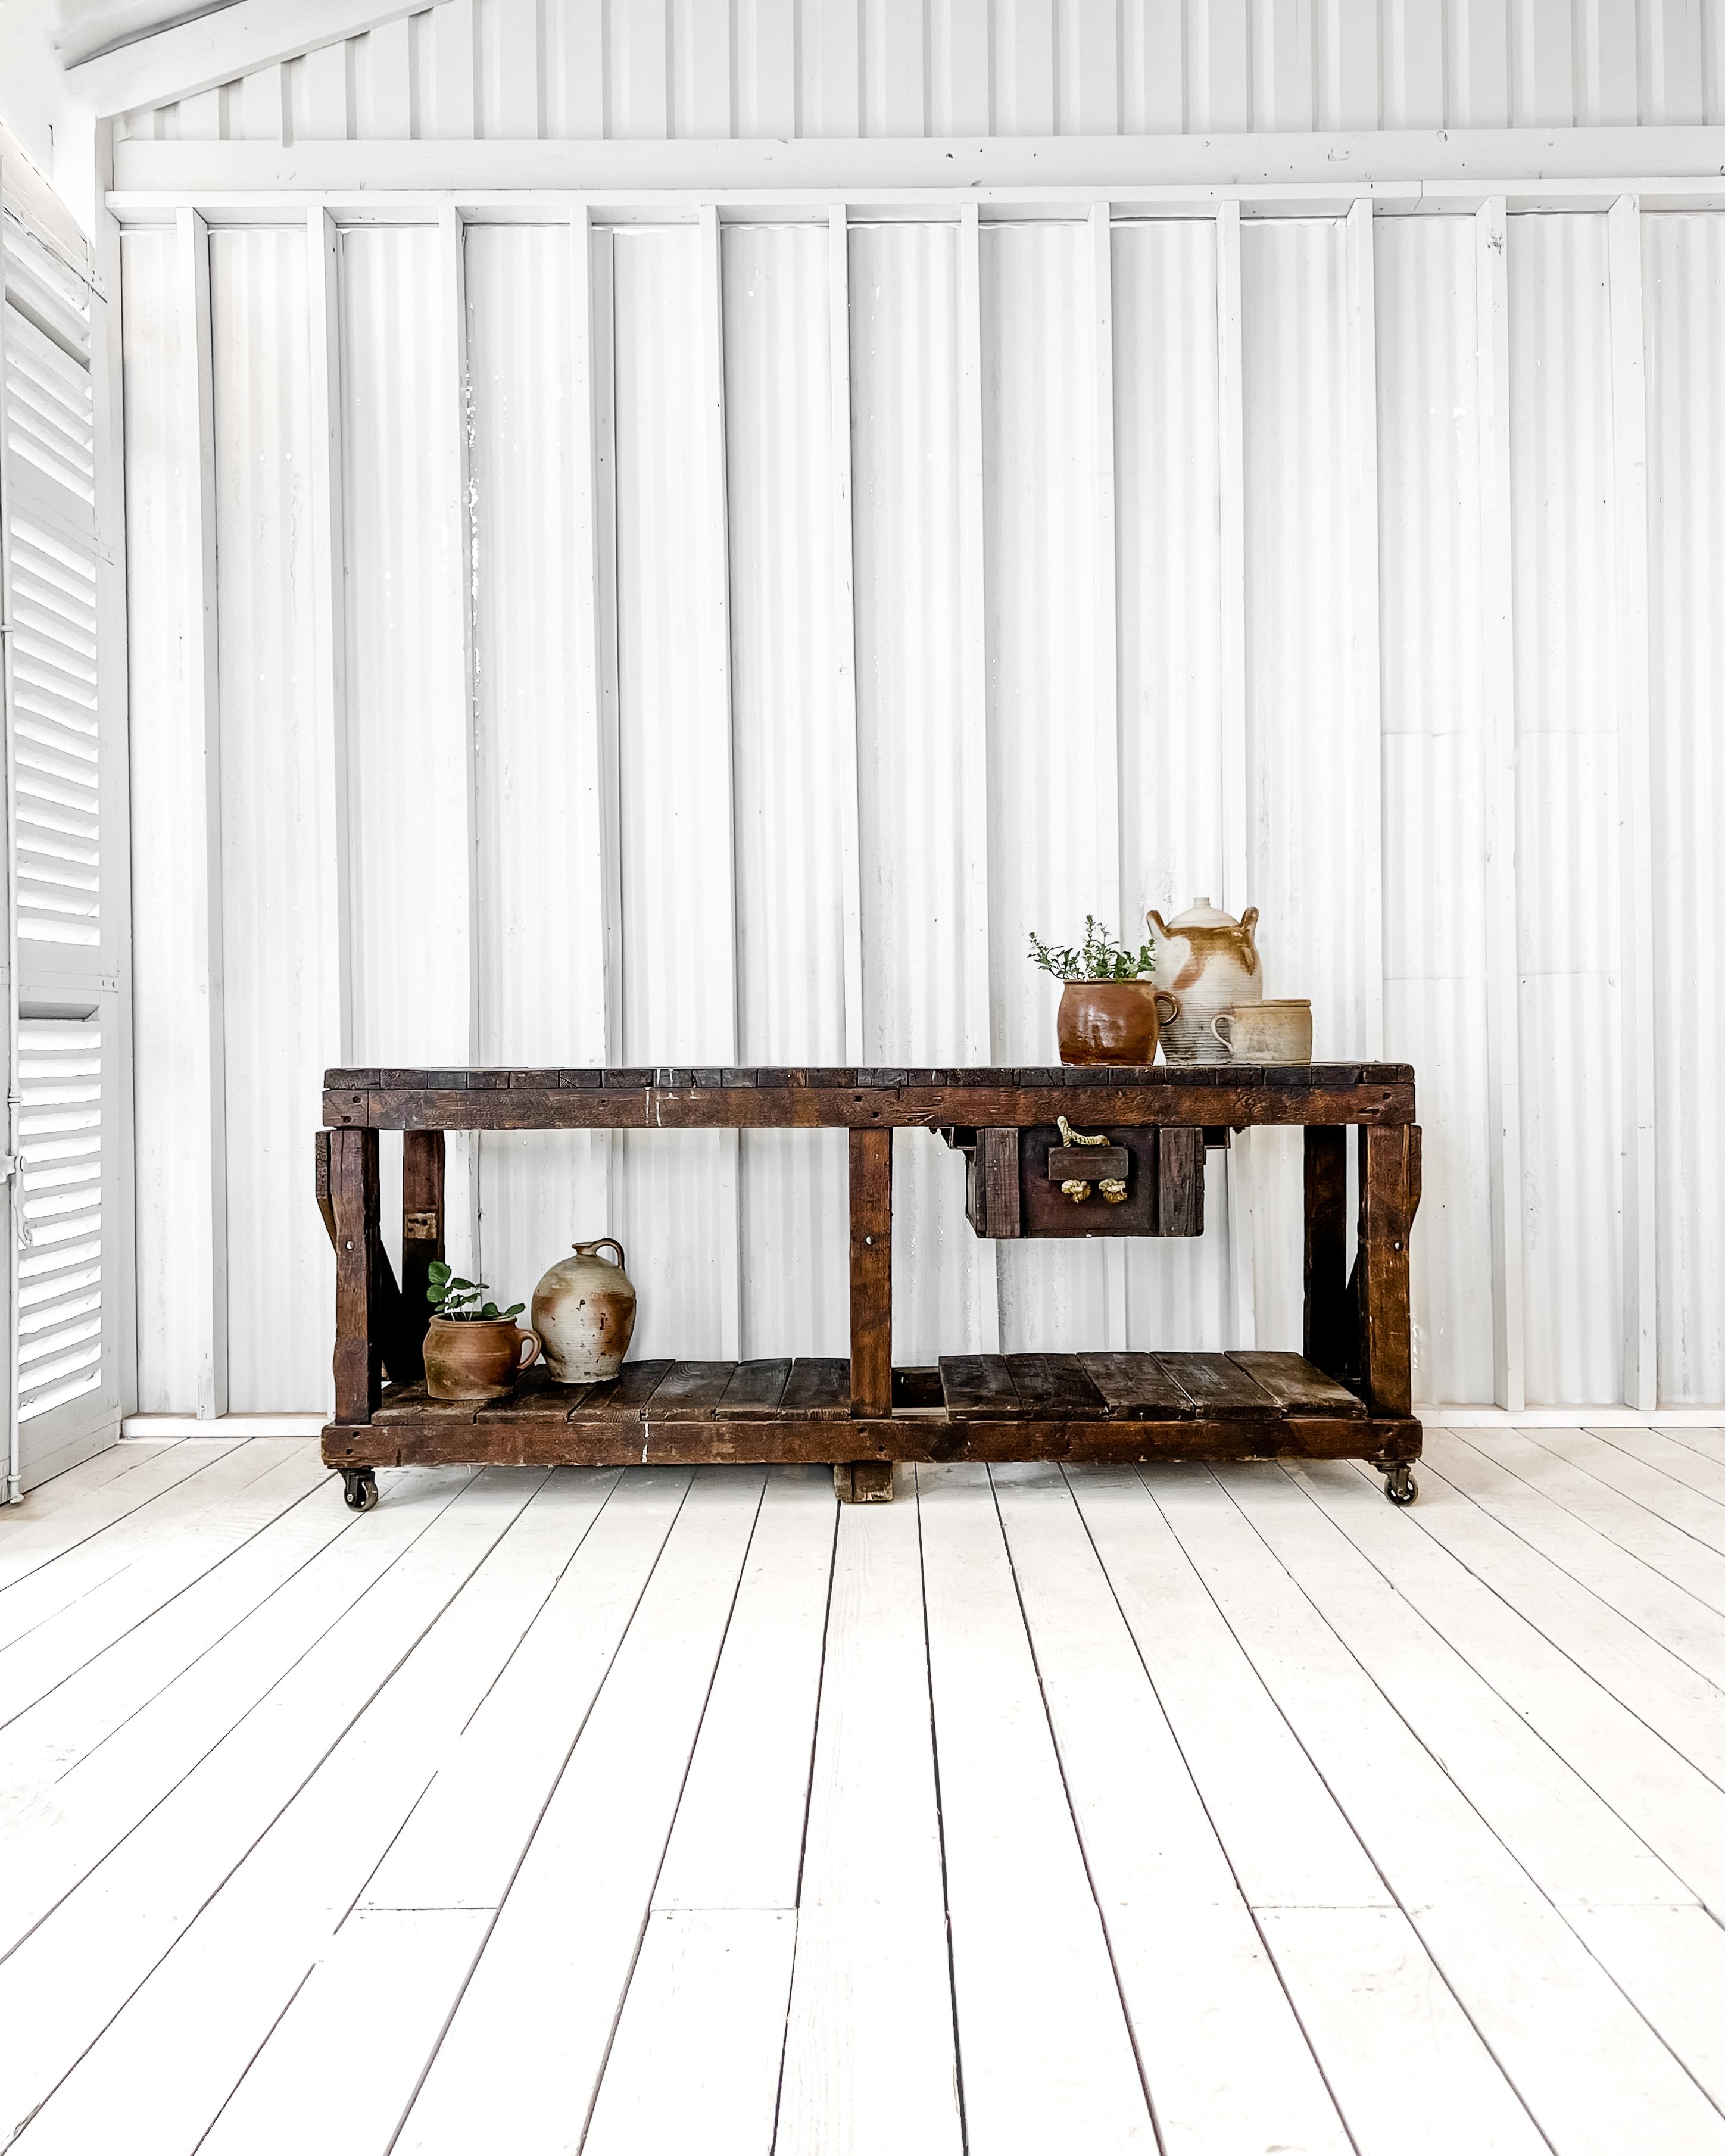 Primitive in design, yet built to last, this solid oak planked workbench, with its dark stain and industrial iron casters, is the perfect piece to mix with modern furnishings, adding a layer of character and authenticity to a modern home. The tongue